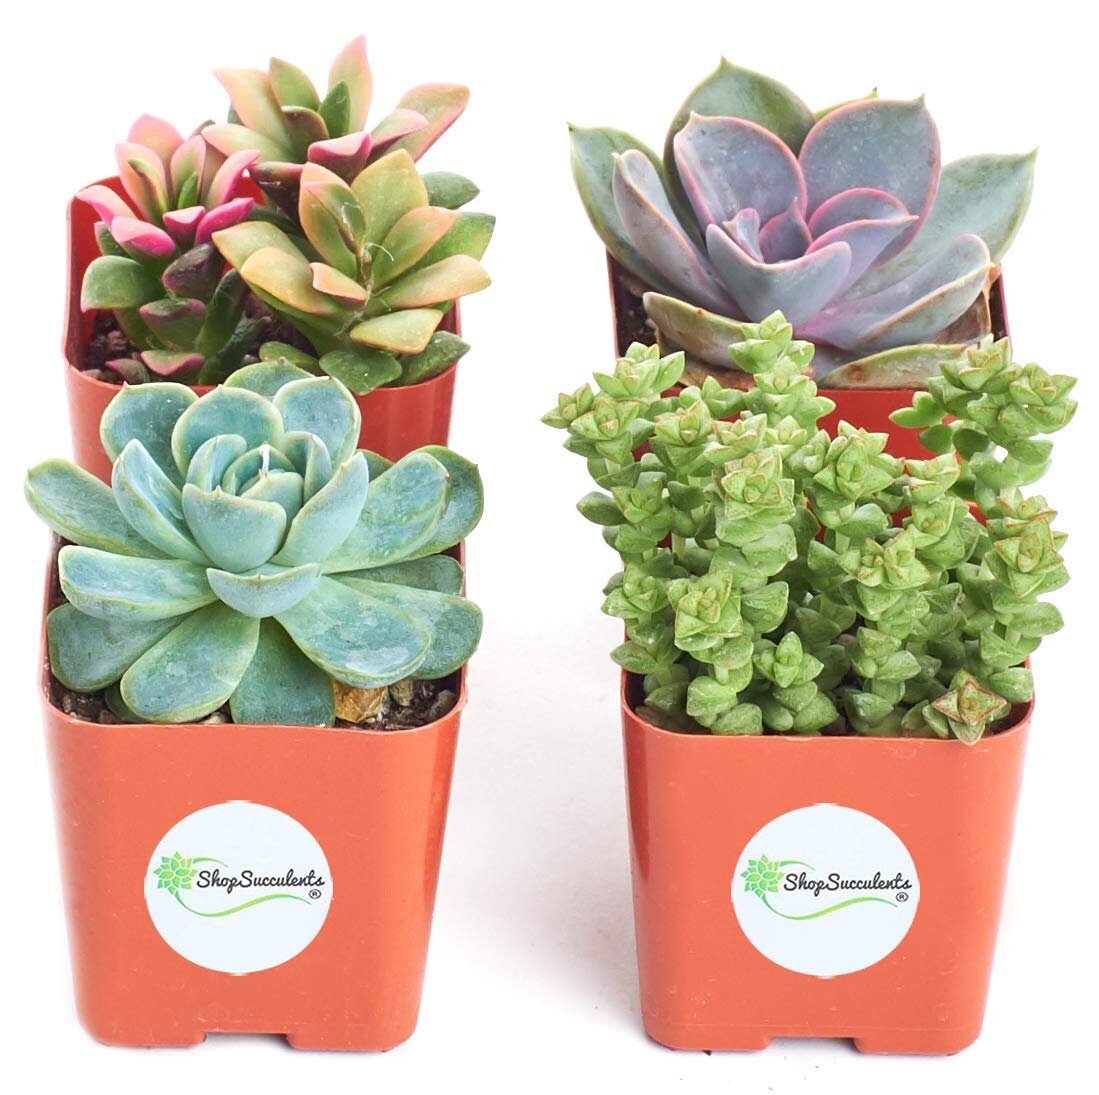 Good Juju Collection of Live Succulent Plants in Gift Box Hand Selected Variety Pack of Mini Succulents Shop Succulents Collection of 4 